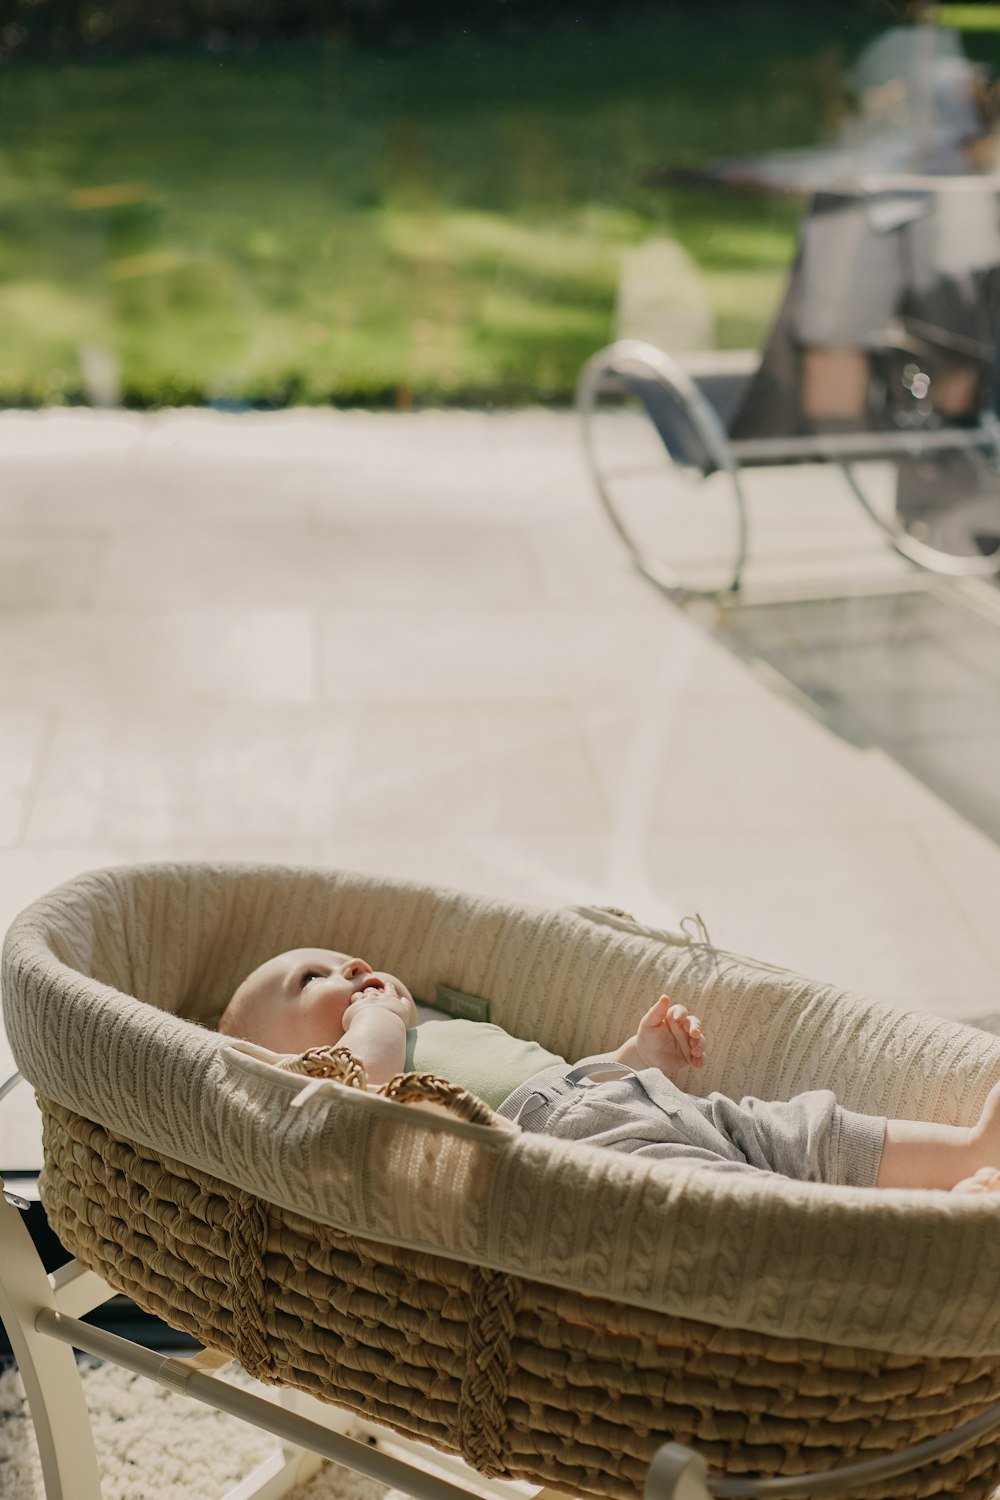 baby in white shirt lying on brown wicker basket